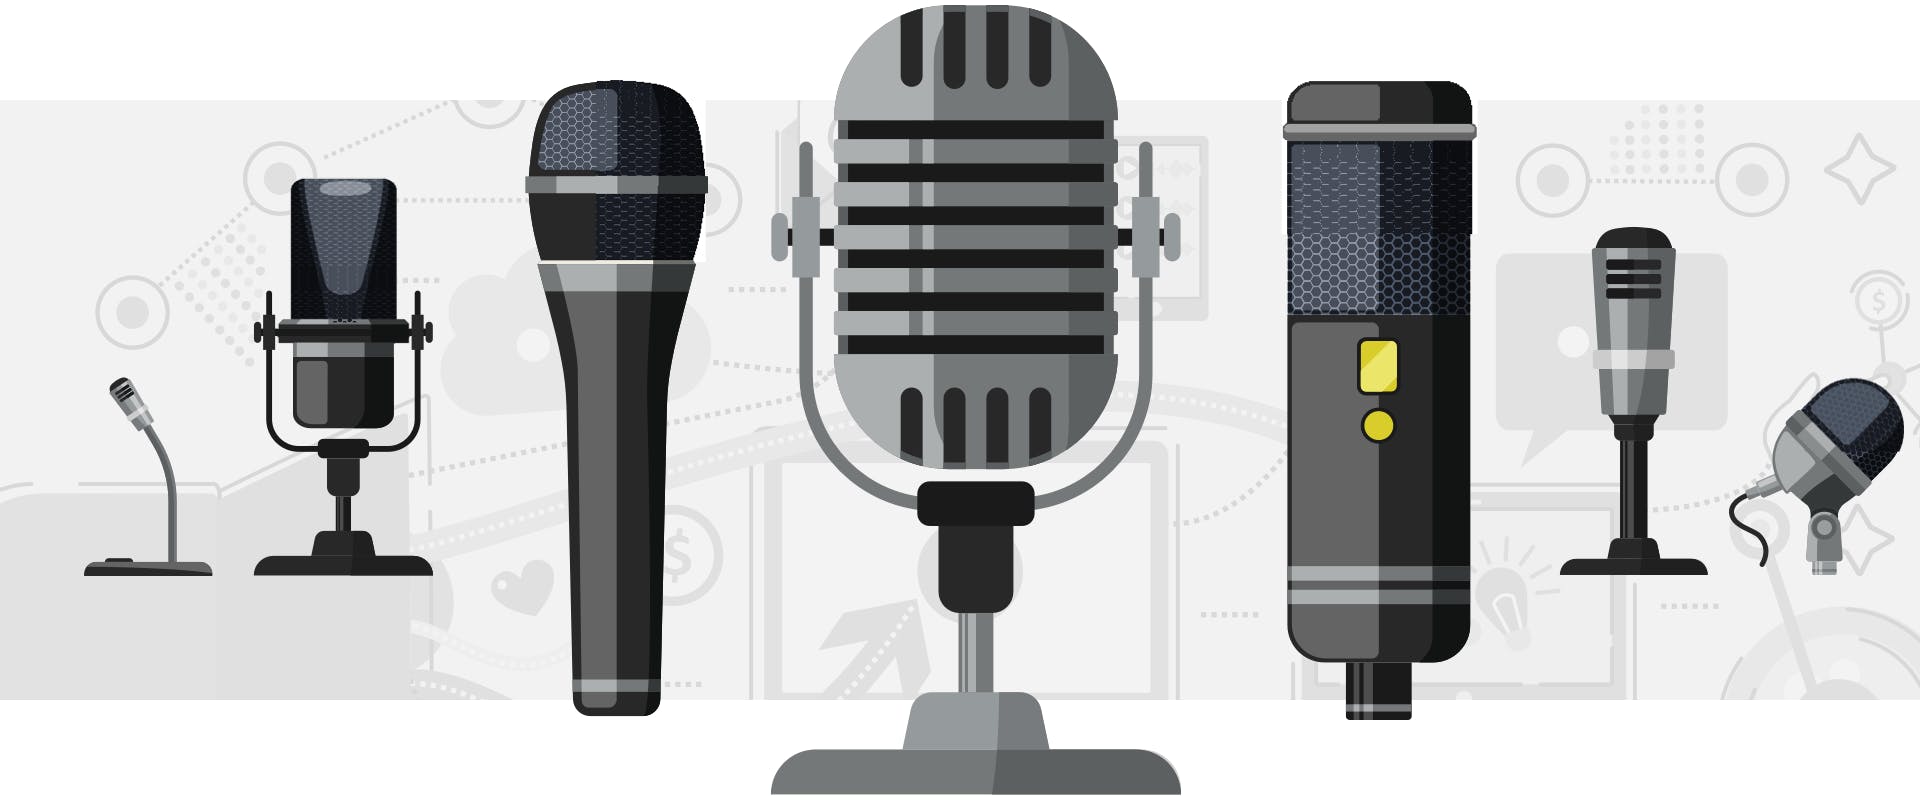 What S The Difference Between An Xlr And Usb Mic